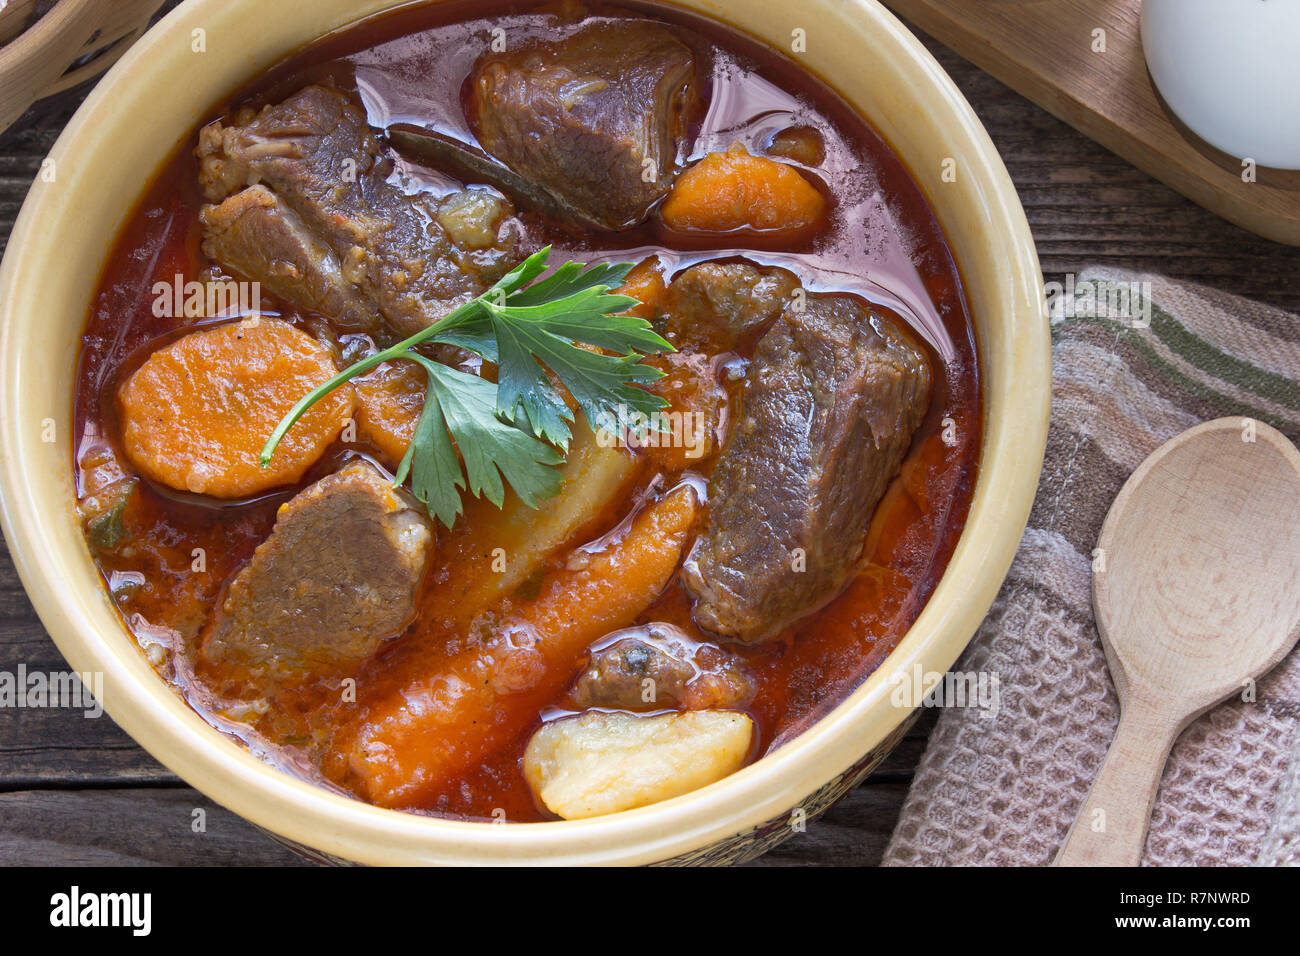 Stew with meat and vegetable in ceramic bowl on table Stock Photo